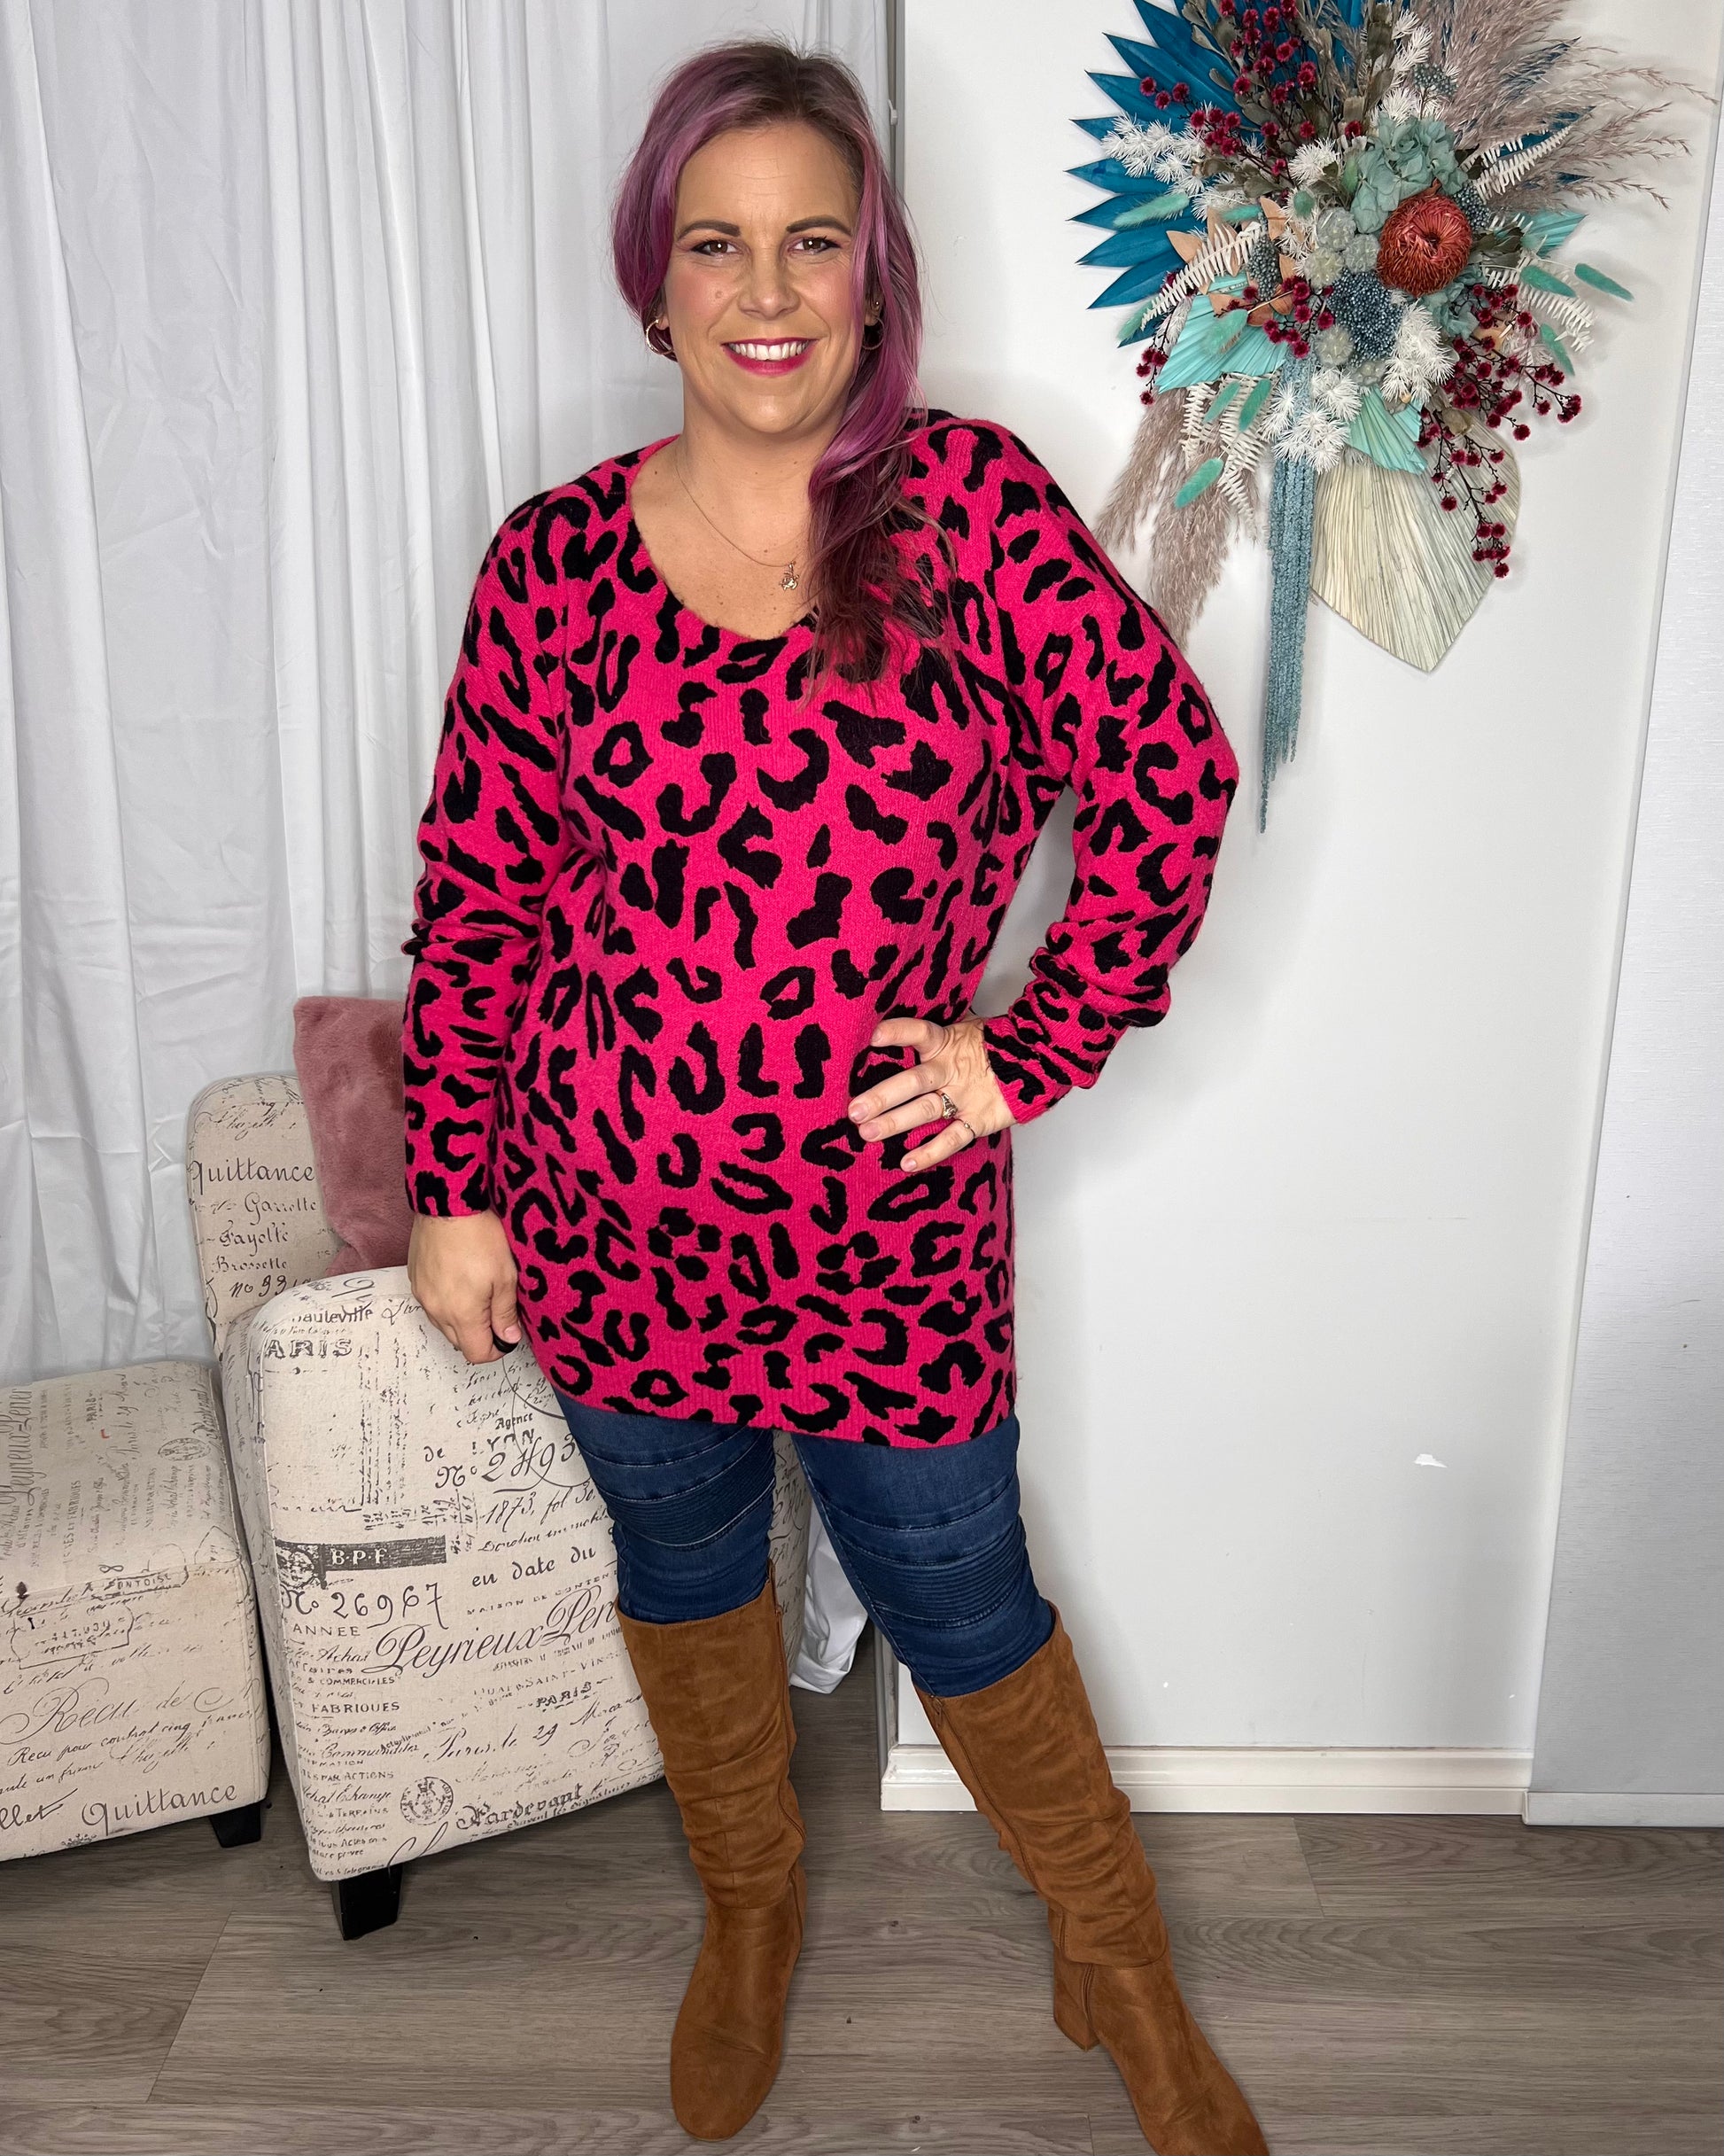 Evie Leopard Print Jumper: The Evie Knit is a light long line knit that will look amazing with jeans, over tights and boots or as a layer with your fave winter jacket
Features:

Long hem
Ribbe - Ciao Bella Dresses 